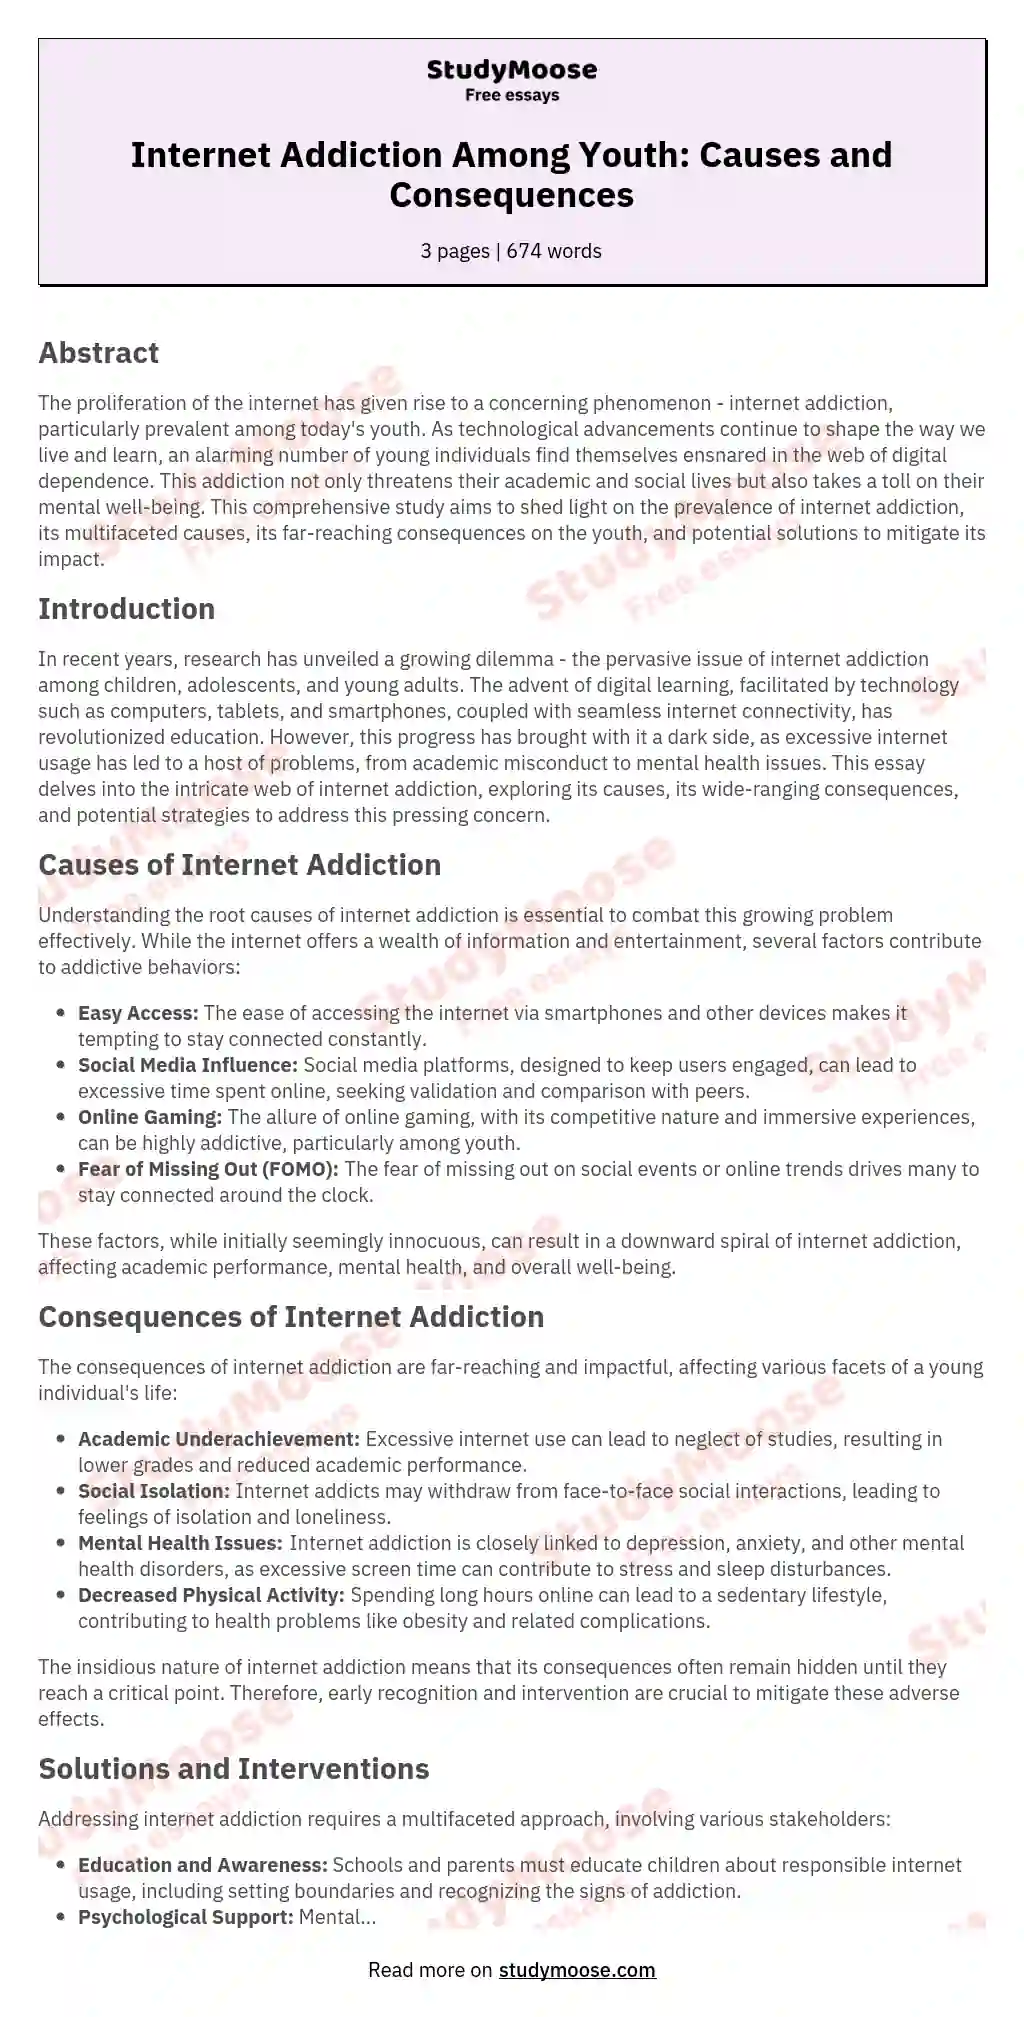 Internet Addiction Among Youth: Causes and Consequences essay